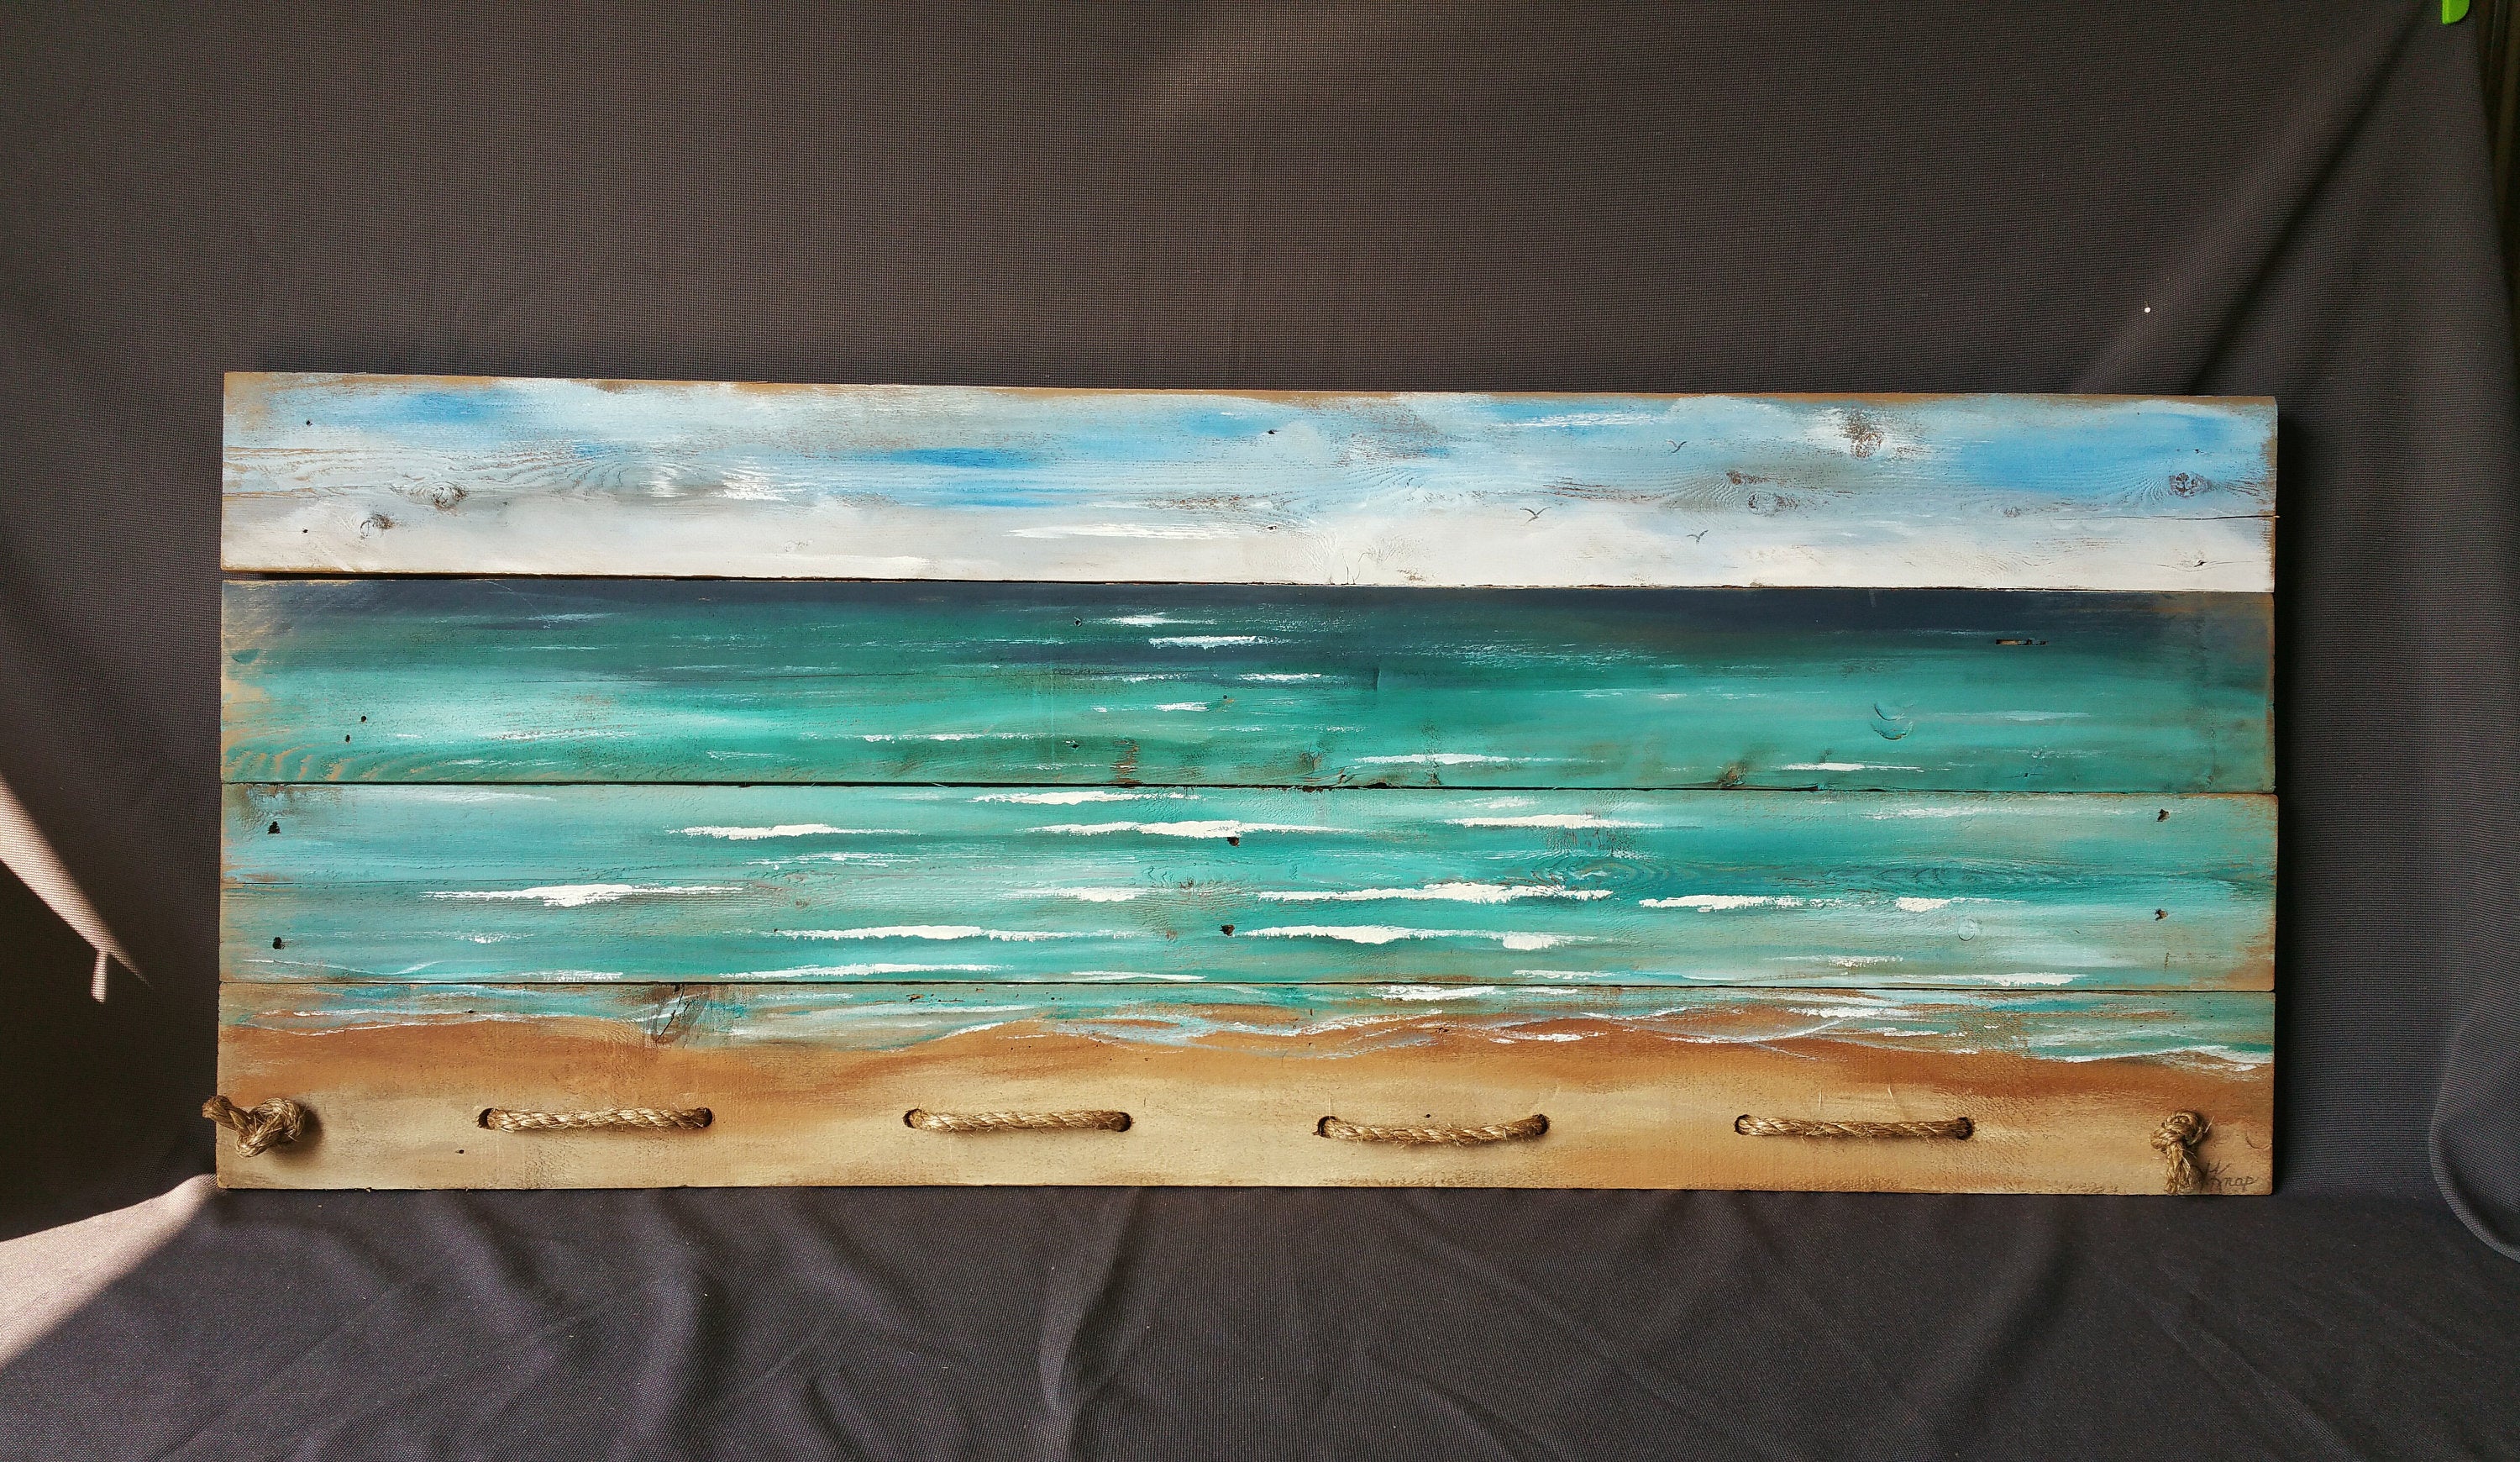 Beach Headboard Pallet art, Hand painted Rustic beach painting with rope accent,  long horizontal mural art, Large couch ocean wall art